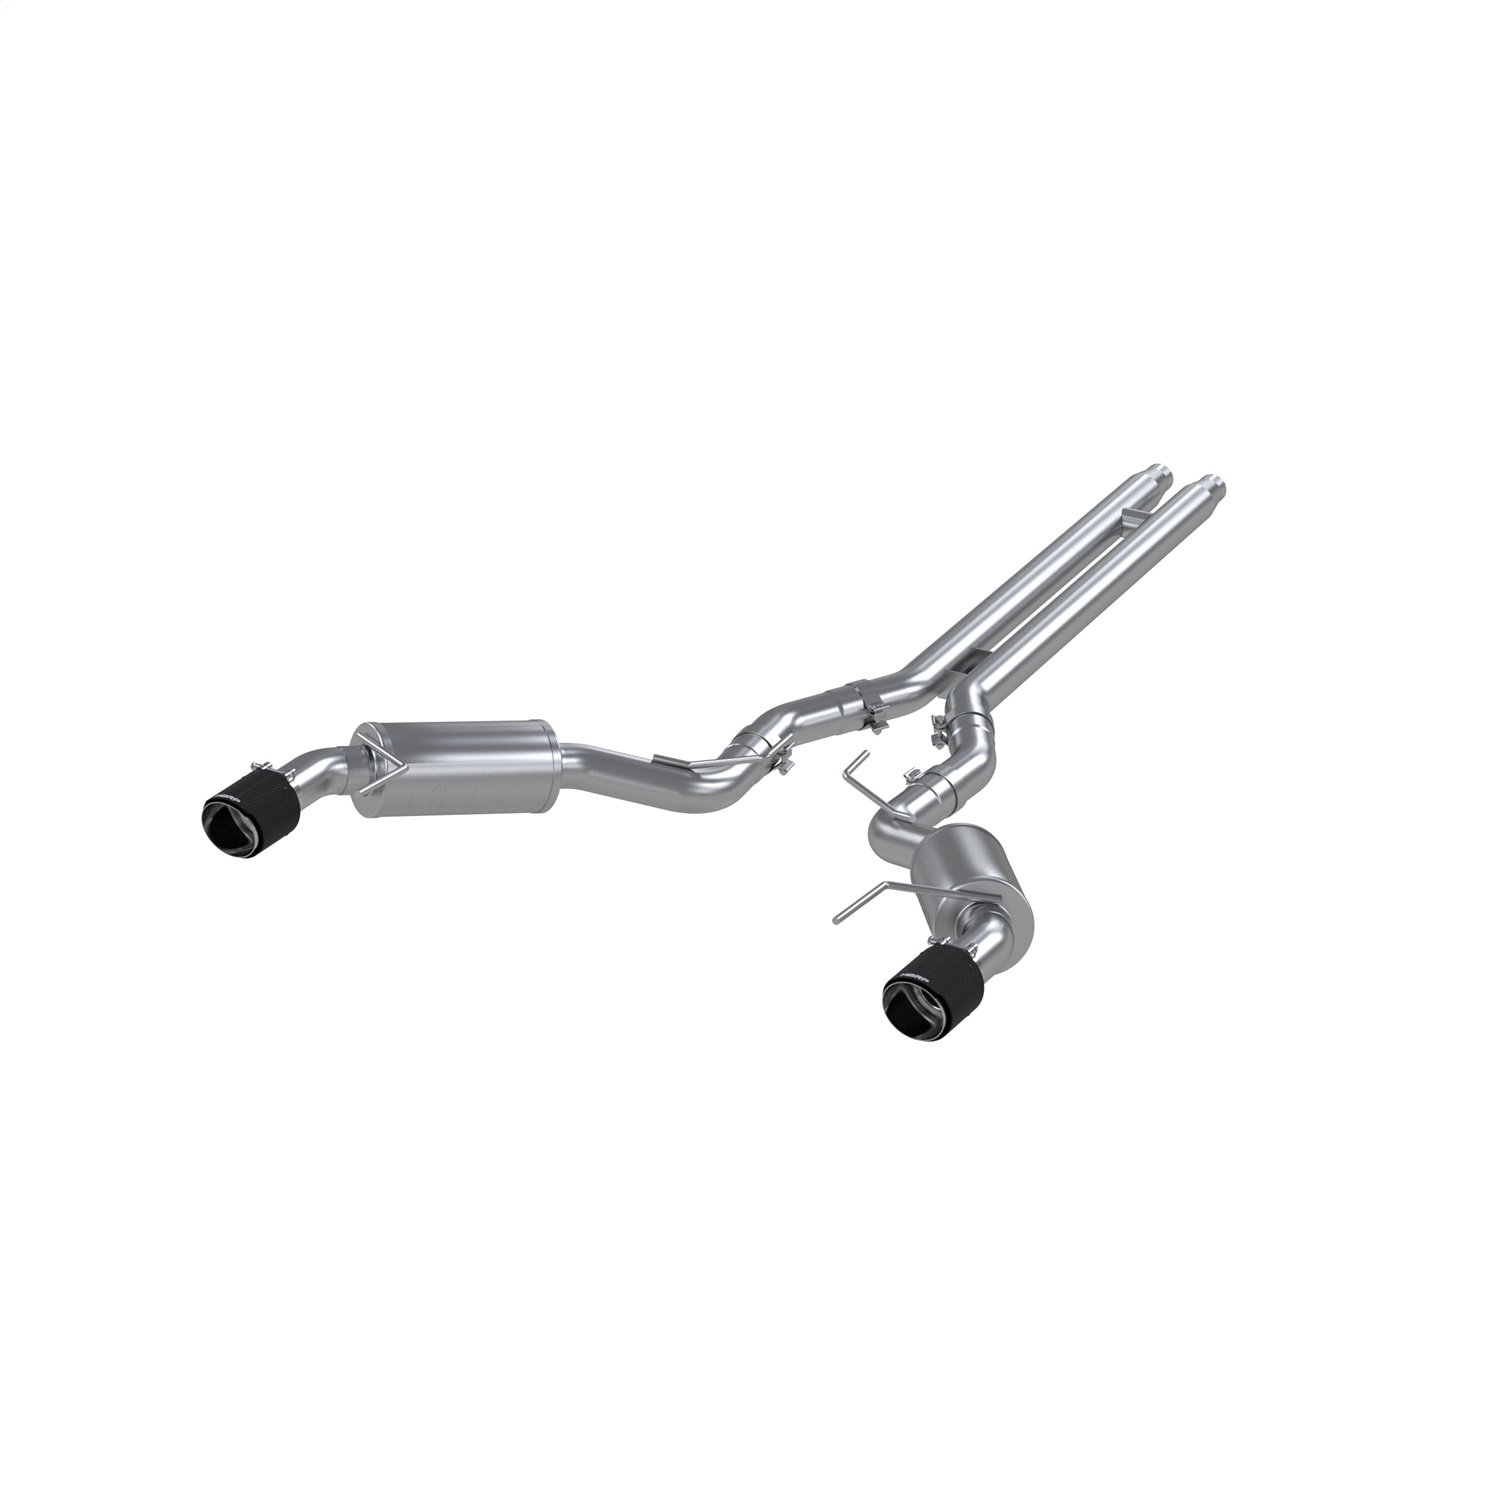 MBRP Exhaust S72773CF Armor Pro Cat Back Exhaust System Fits 15-17 Mustang